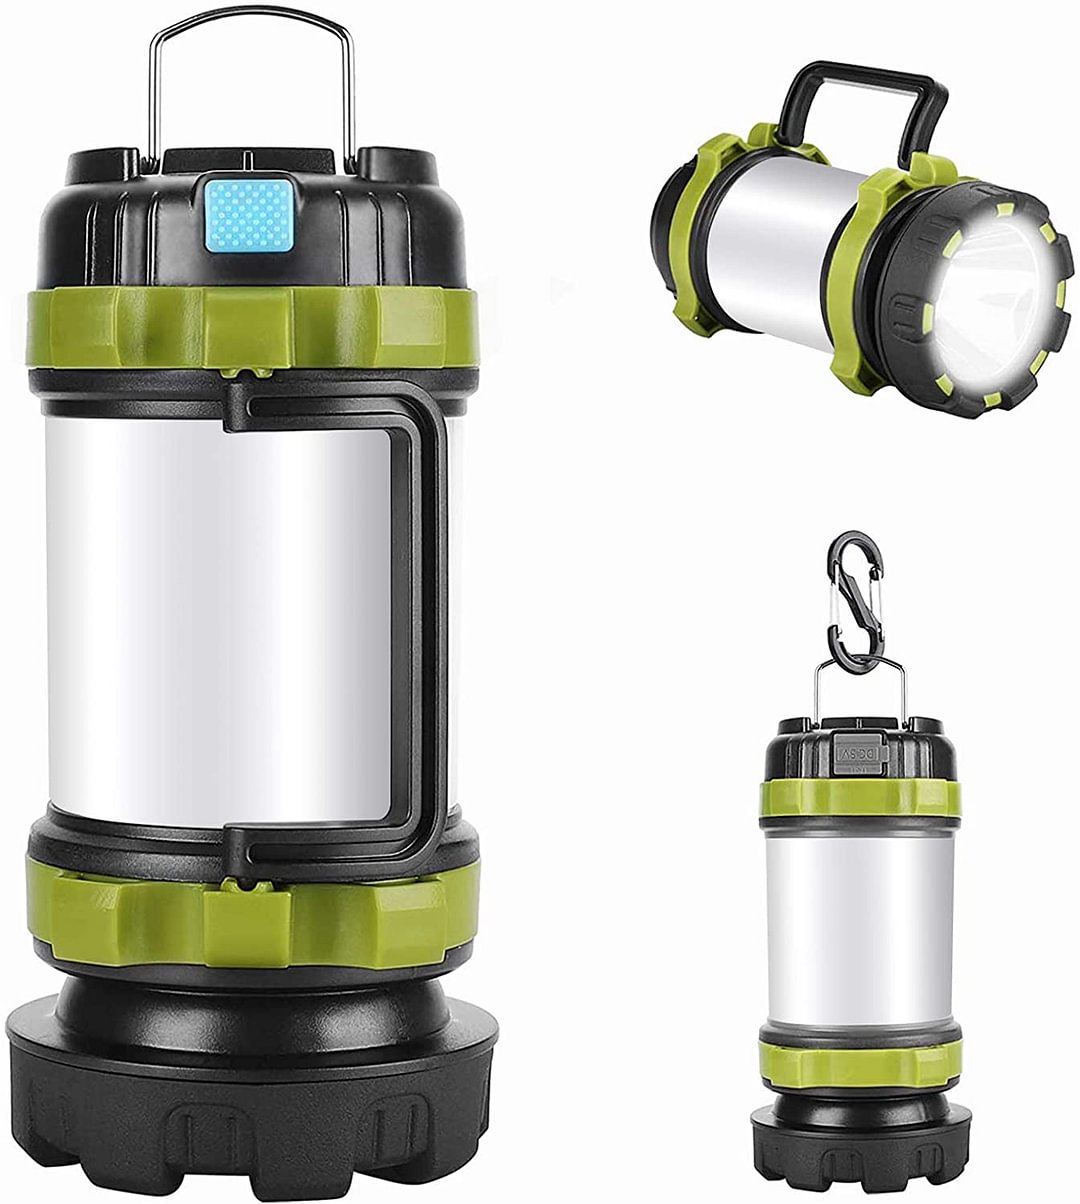 Camping Lantern Rechargeable , Camping Flashlight 4000mAh Power Bank,6 Modes, IPX4 Waterproof, Led Lantern Camping, Hiking, Outdoor Recreations, USB Charging Cable Included、、sdecorshop